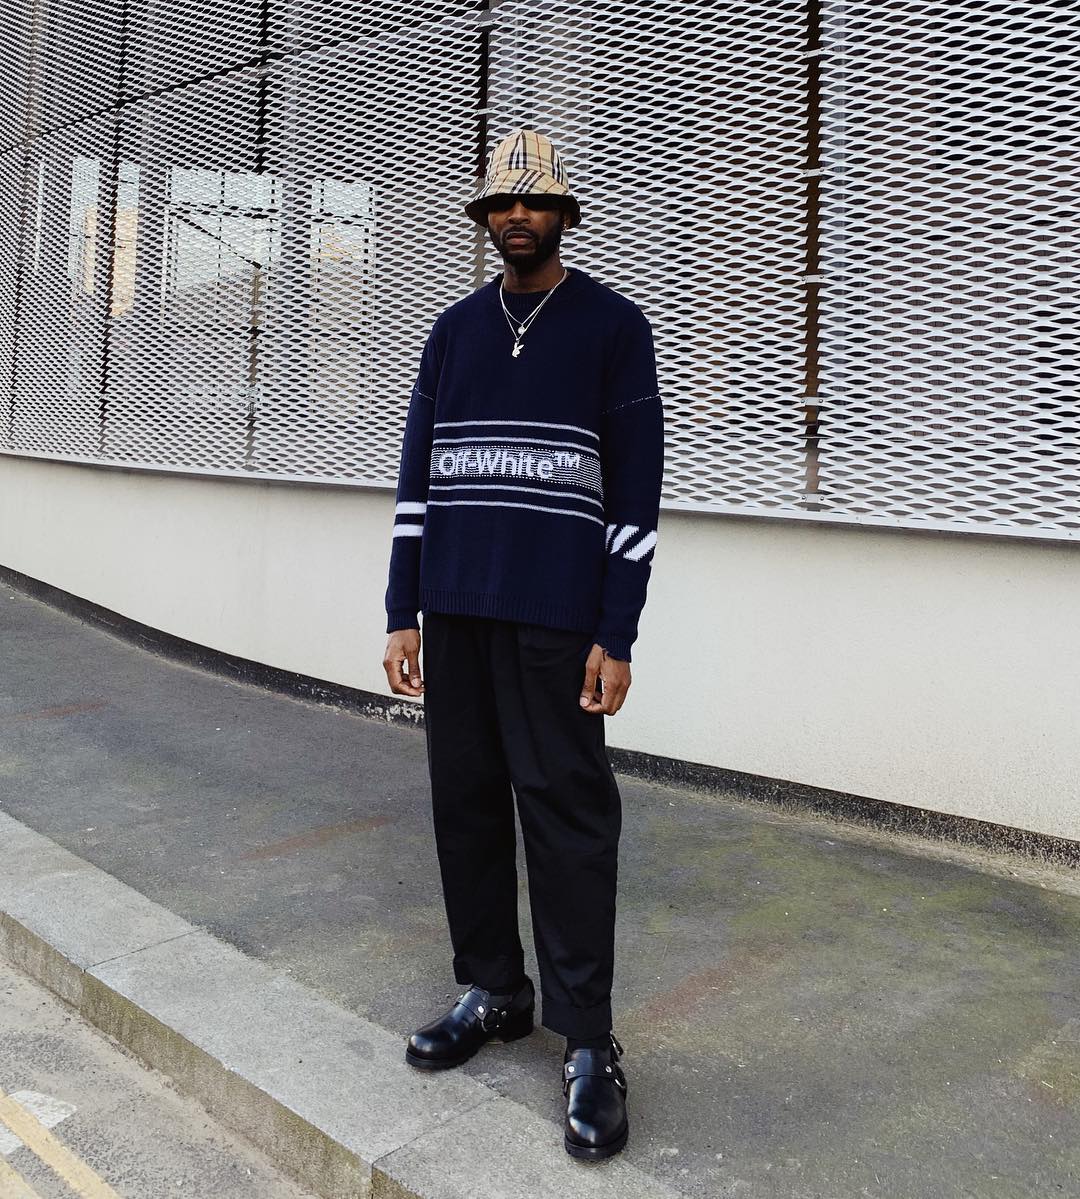 Pause Highlights 8 Bucket Hat Styles For Your Consideration